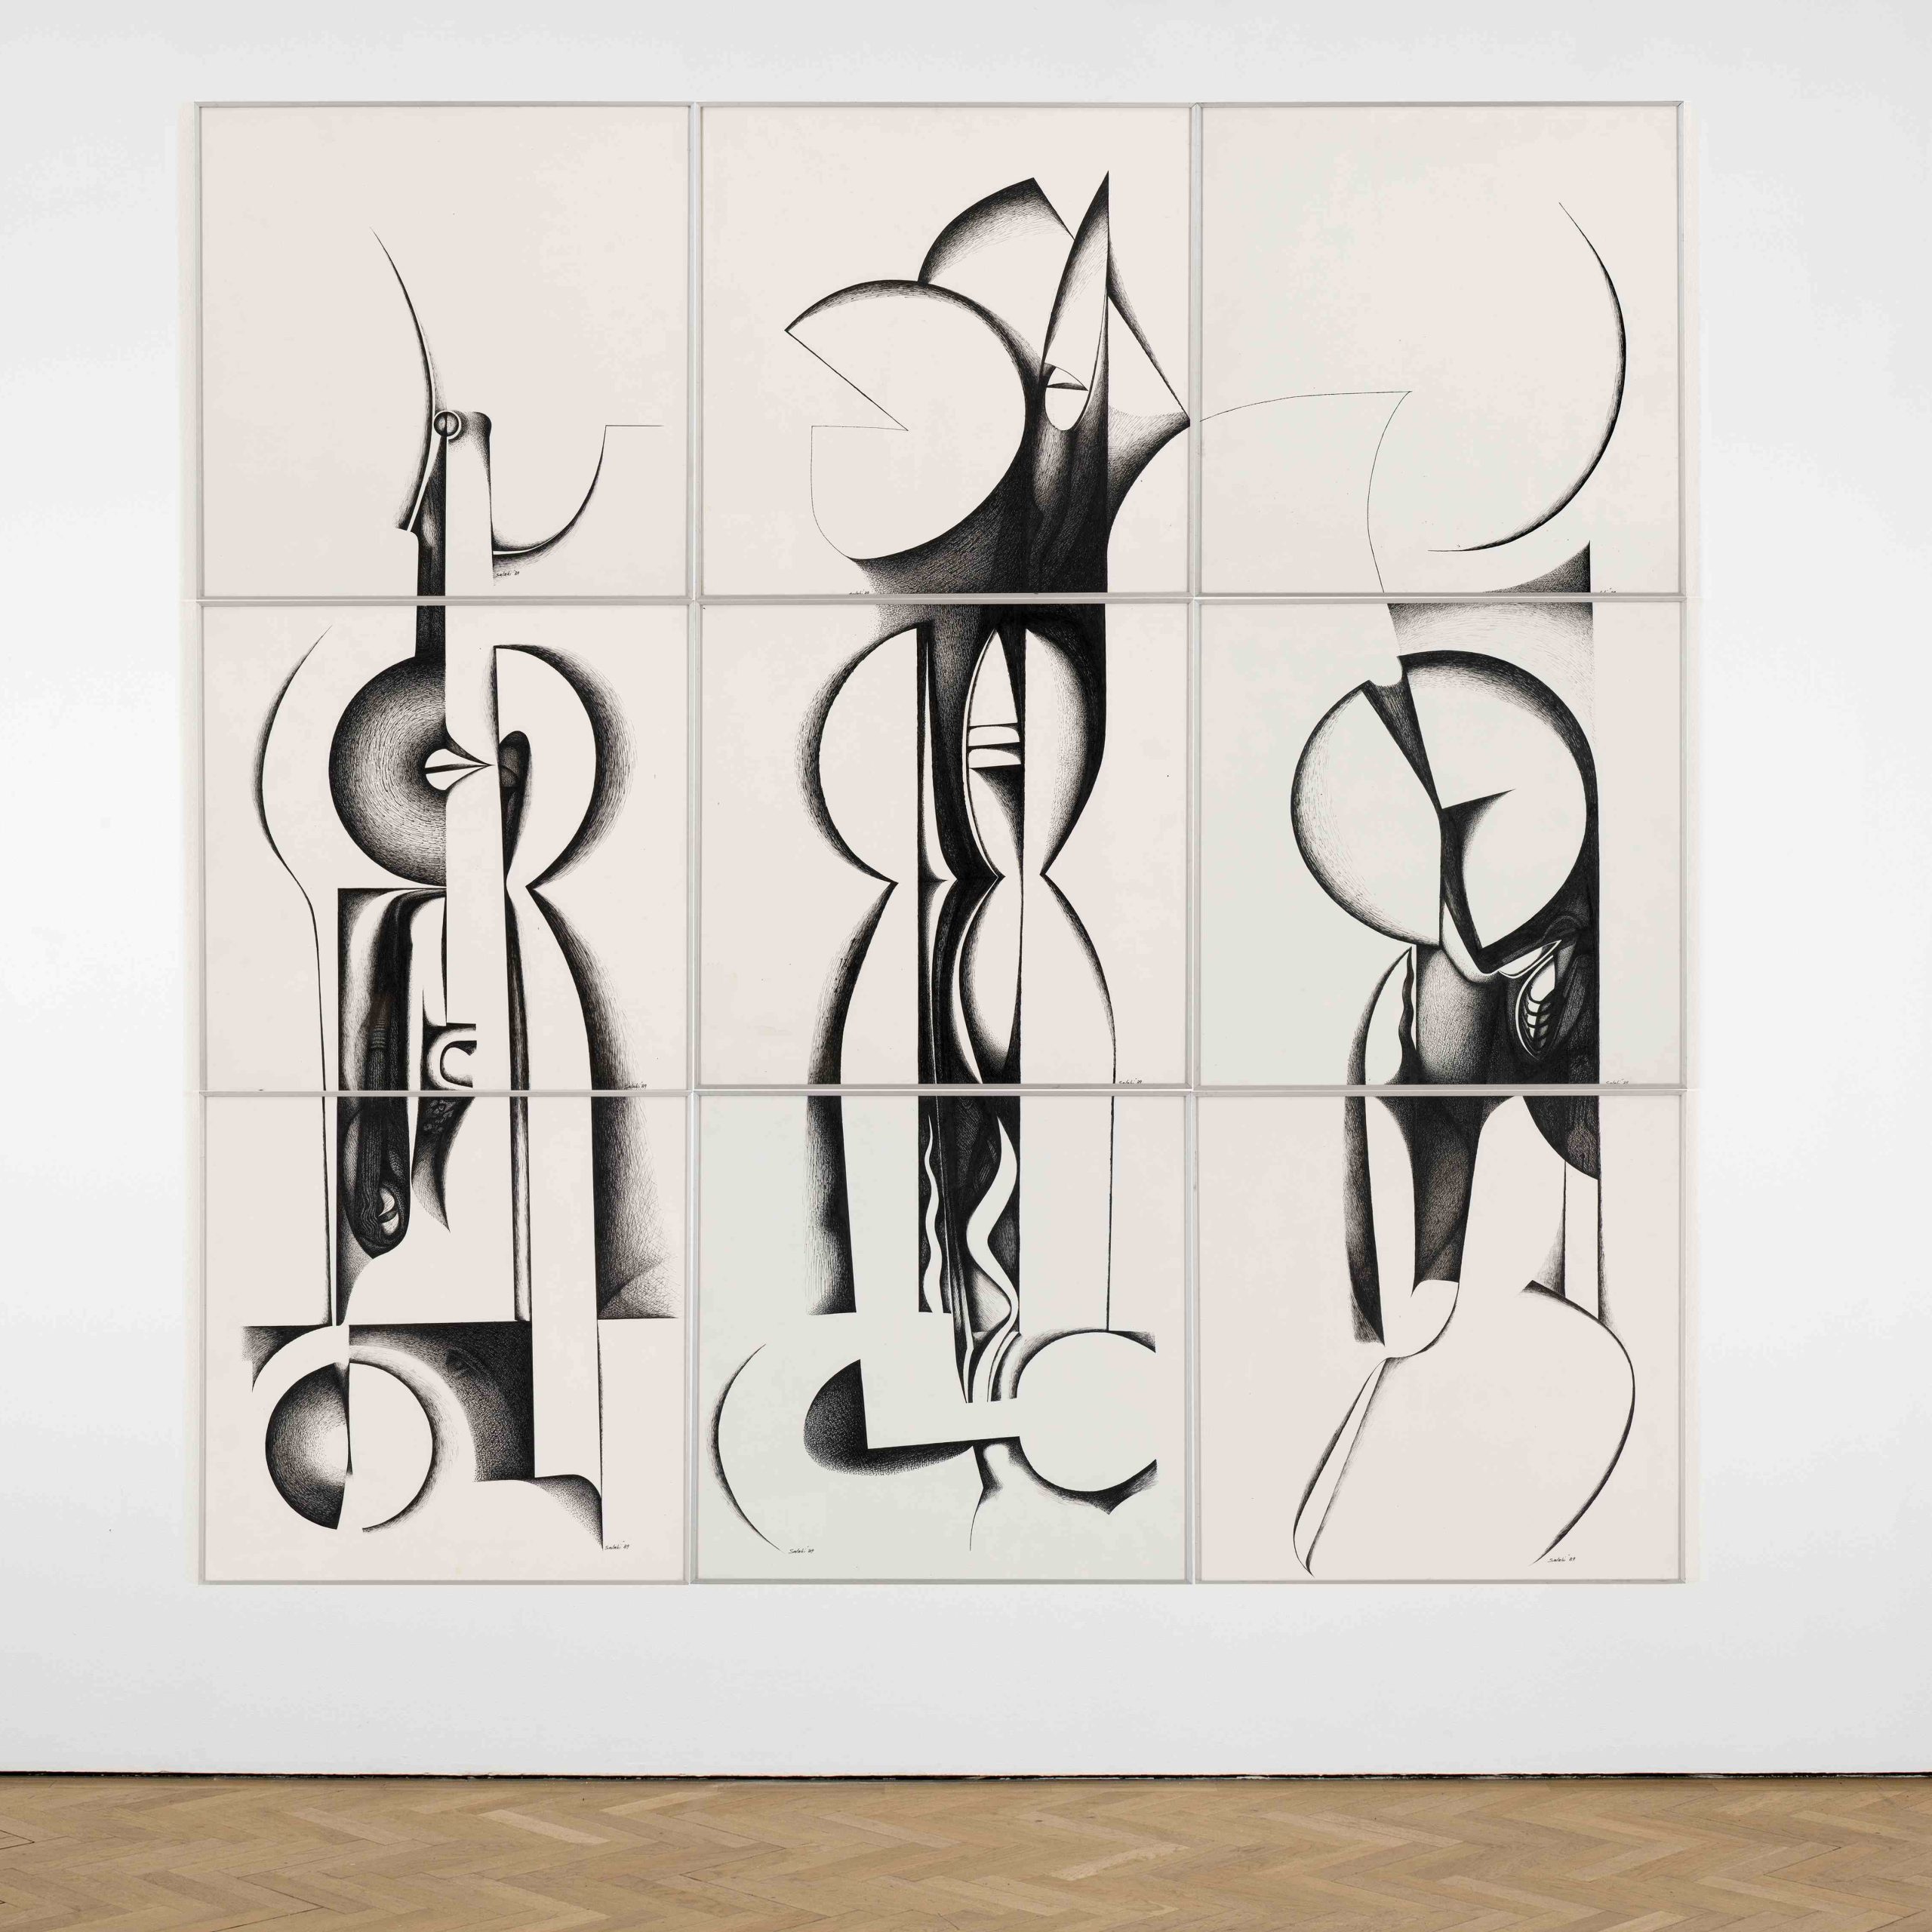 Ibrahim El Salahi, Calligraphic Forms III, 1989, Ink on paper, 135 x 135 cm, Courtesy of Modern Forms - One of El-Salahi’s most important abstract works on paper, Calligraphic Forms III channels elements of Cubism and Surrealism alongside Muslim iconography, especially the compositional forms suggested by Arabic calligraphy.